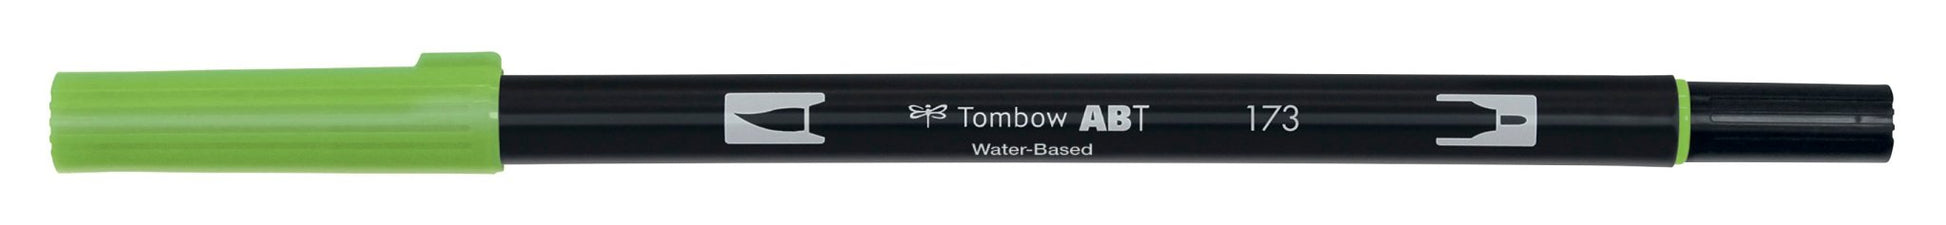 Tombow ABT dual brush pen - single colours - Tombow - Willow green ABT-173 - millenotes